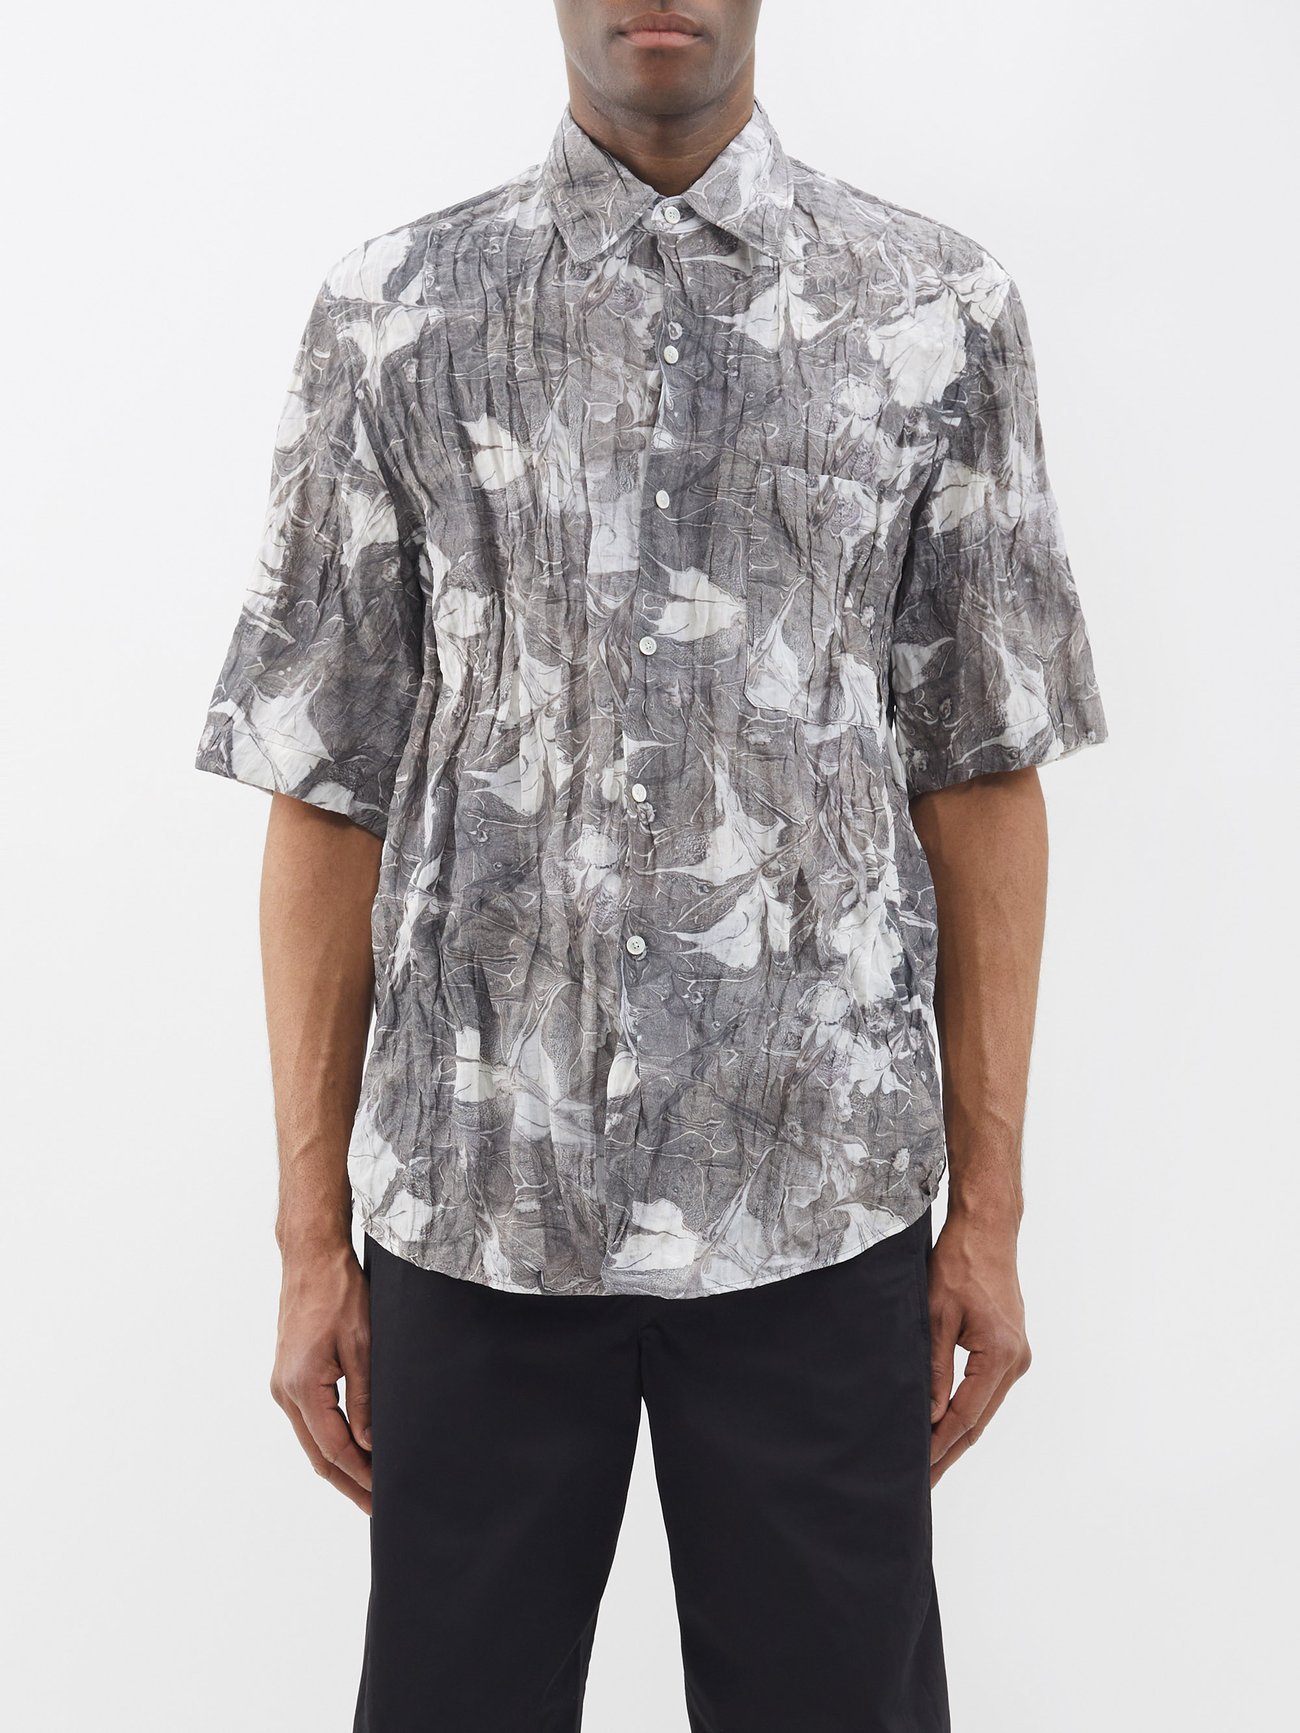 Apricot/Chalk Crinkled Fitted Shirt in Printed Crinkle Silk Mix | LEMAIRE